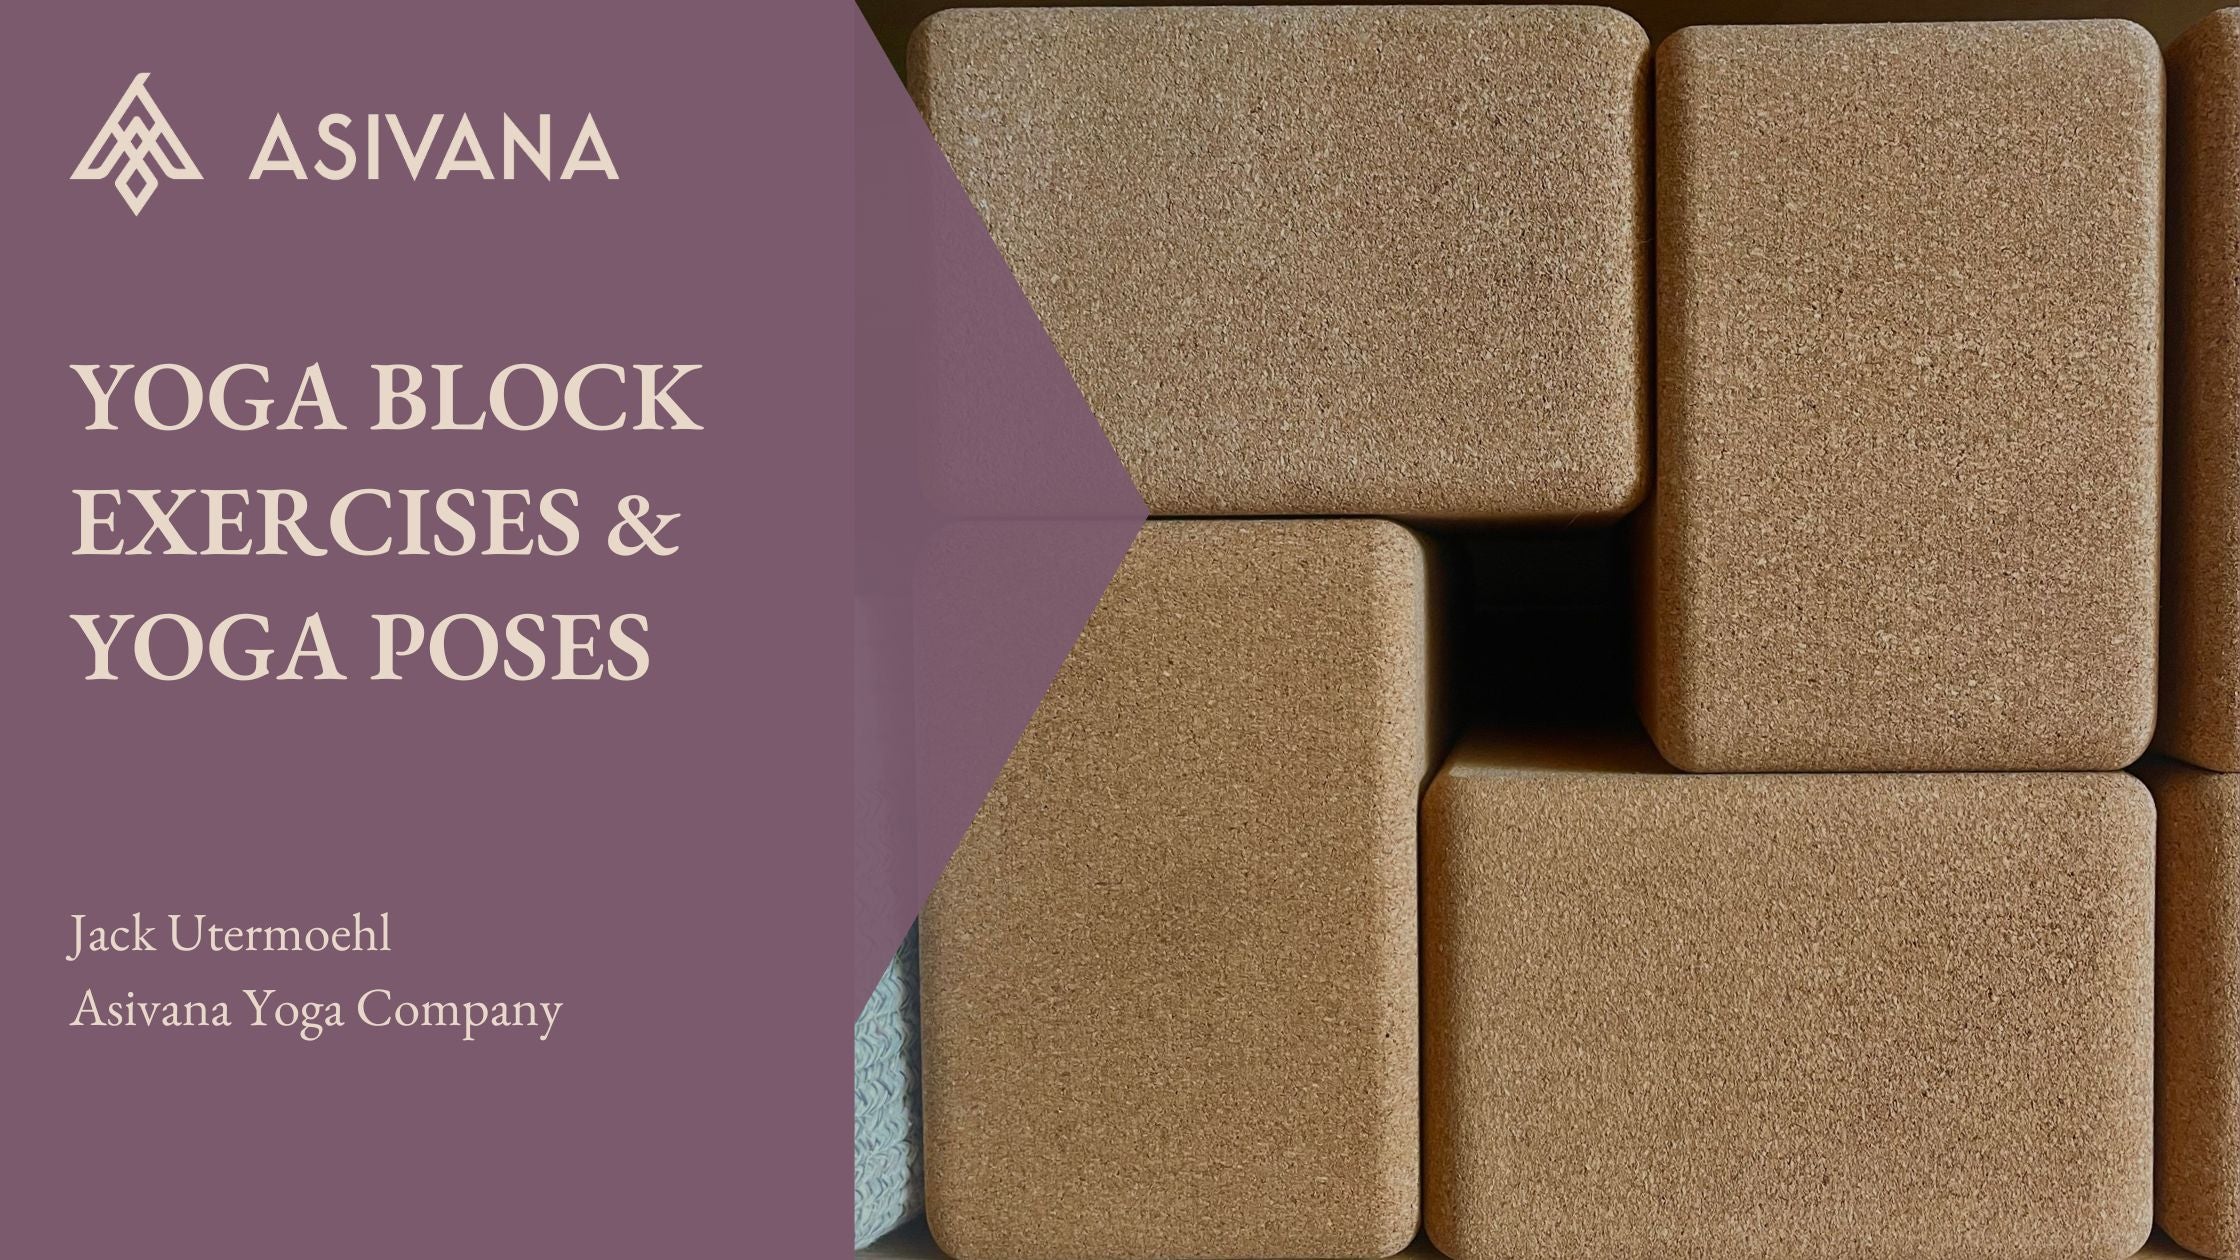 How to Use Yoga Blocks for Beginners